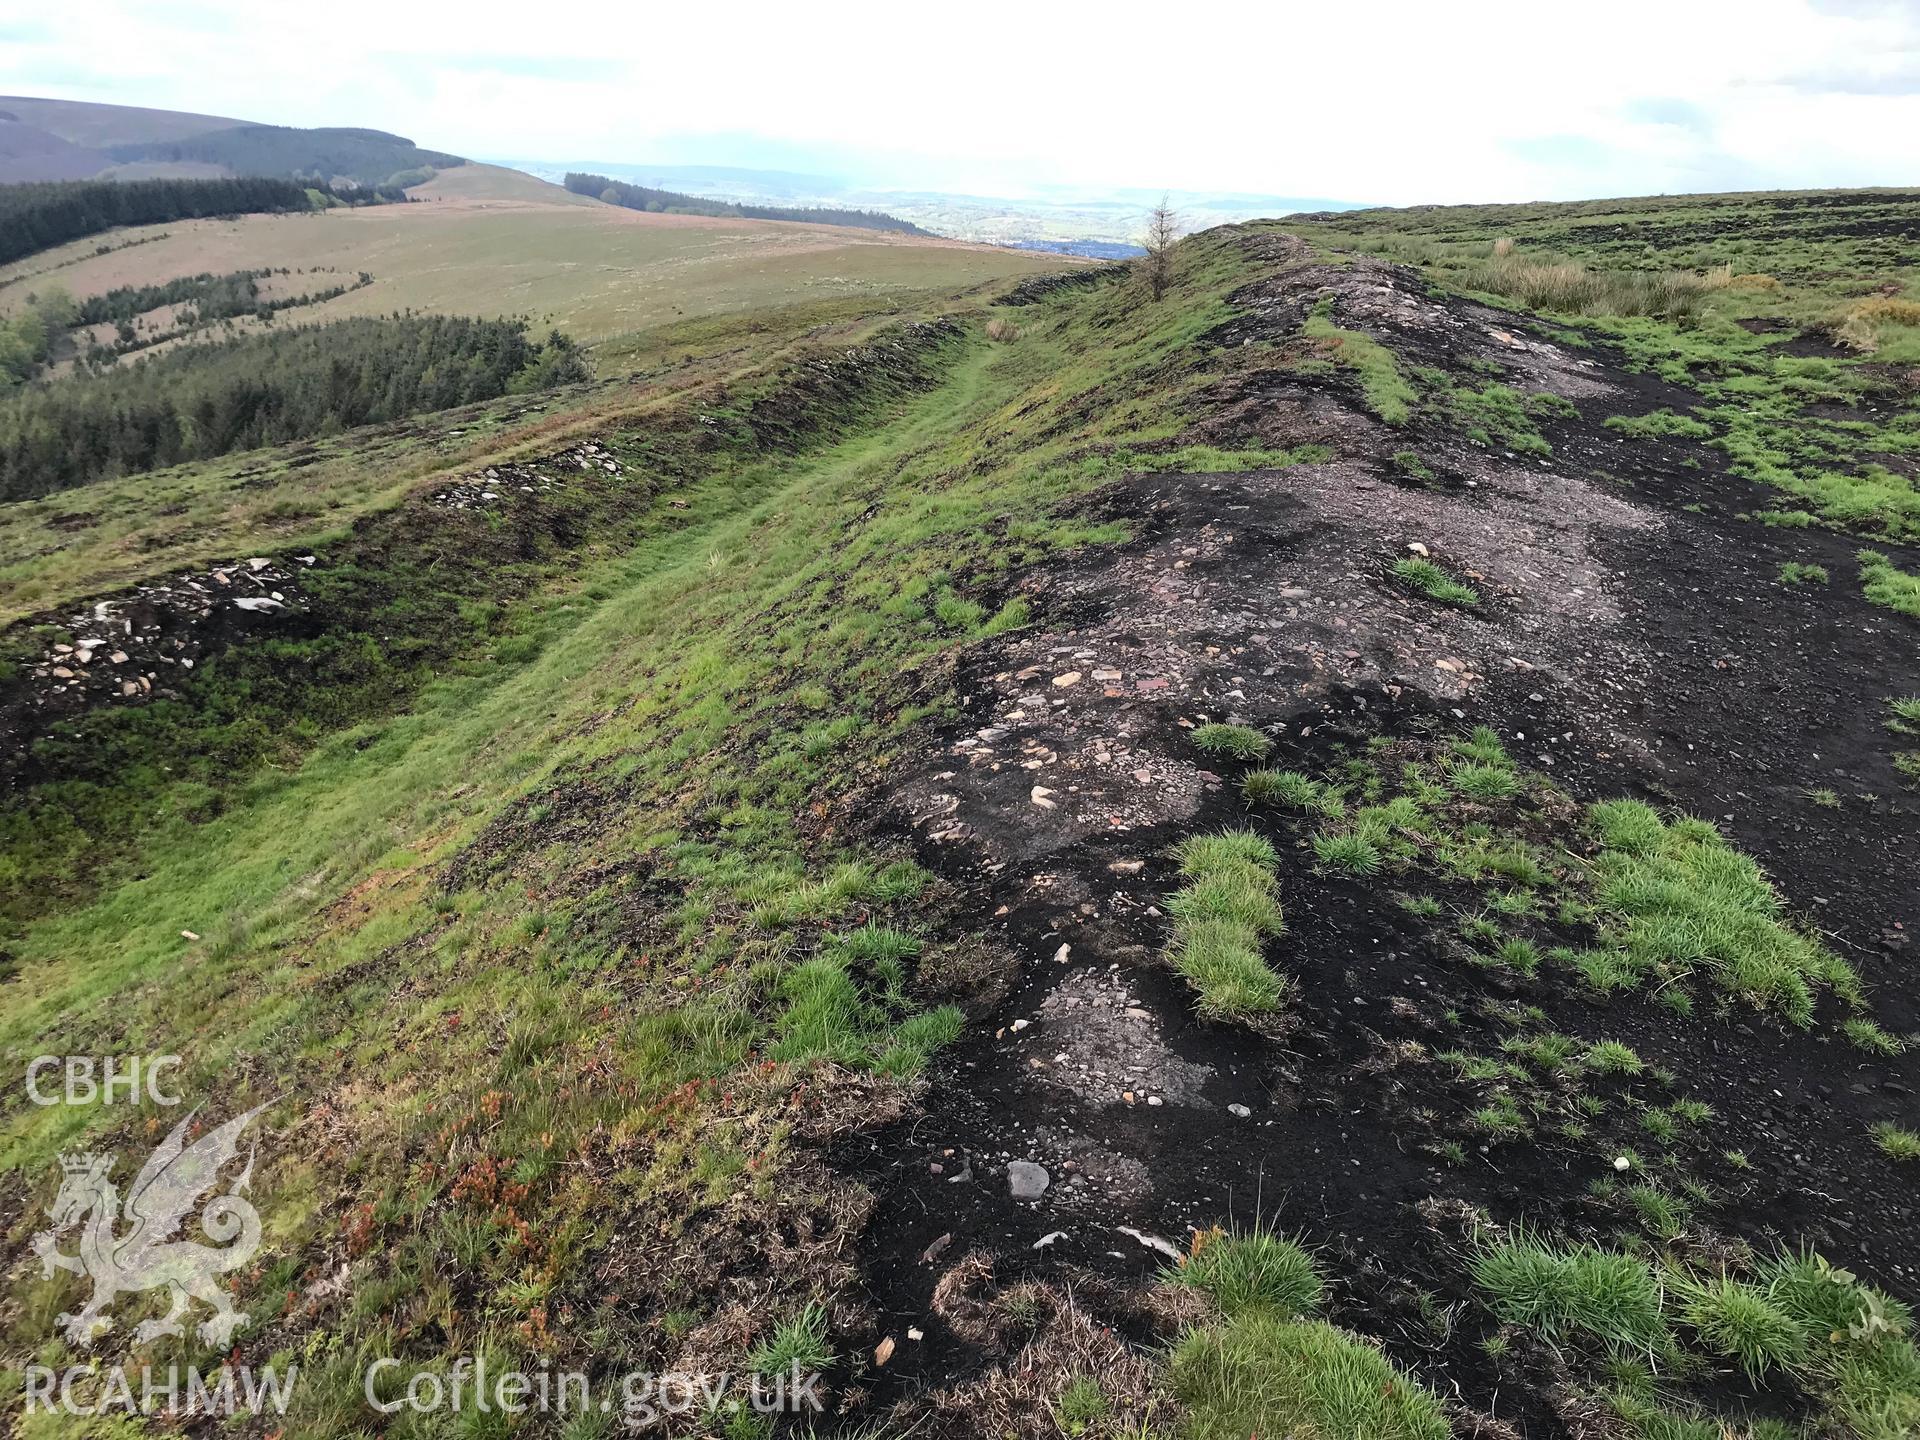 Digital colour photograph showing fire damage at Twmbarlwm Hillfort and Castle, Risca, taken by Paul R. Davis on 9th May 2019.